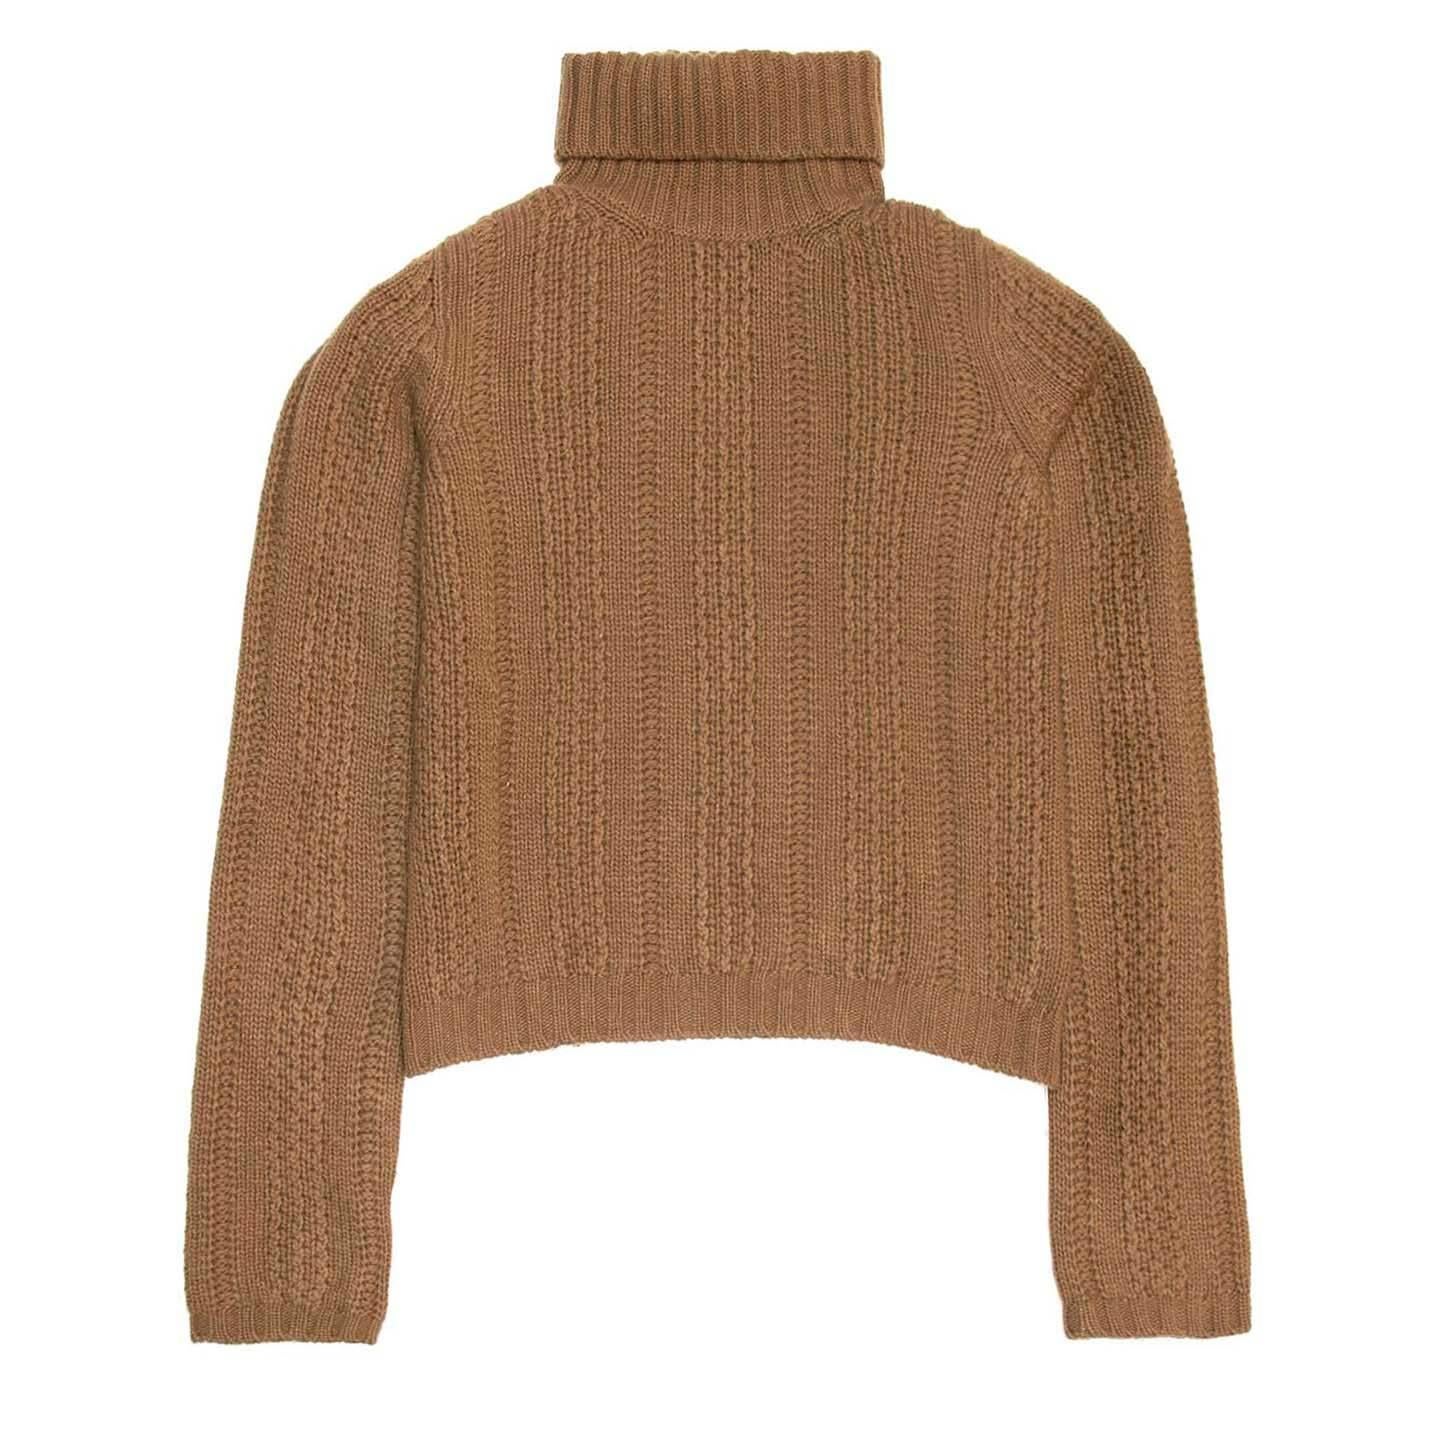 Prada camel colored fine cable knit wool and cashmere sweater. Ribbed roll down turtle neck. Ribbed hem and sleeve cuffs.

Size  44 Italian sizing

Condition  Excellent: never worn